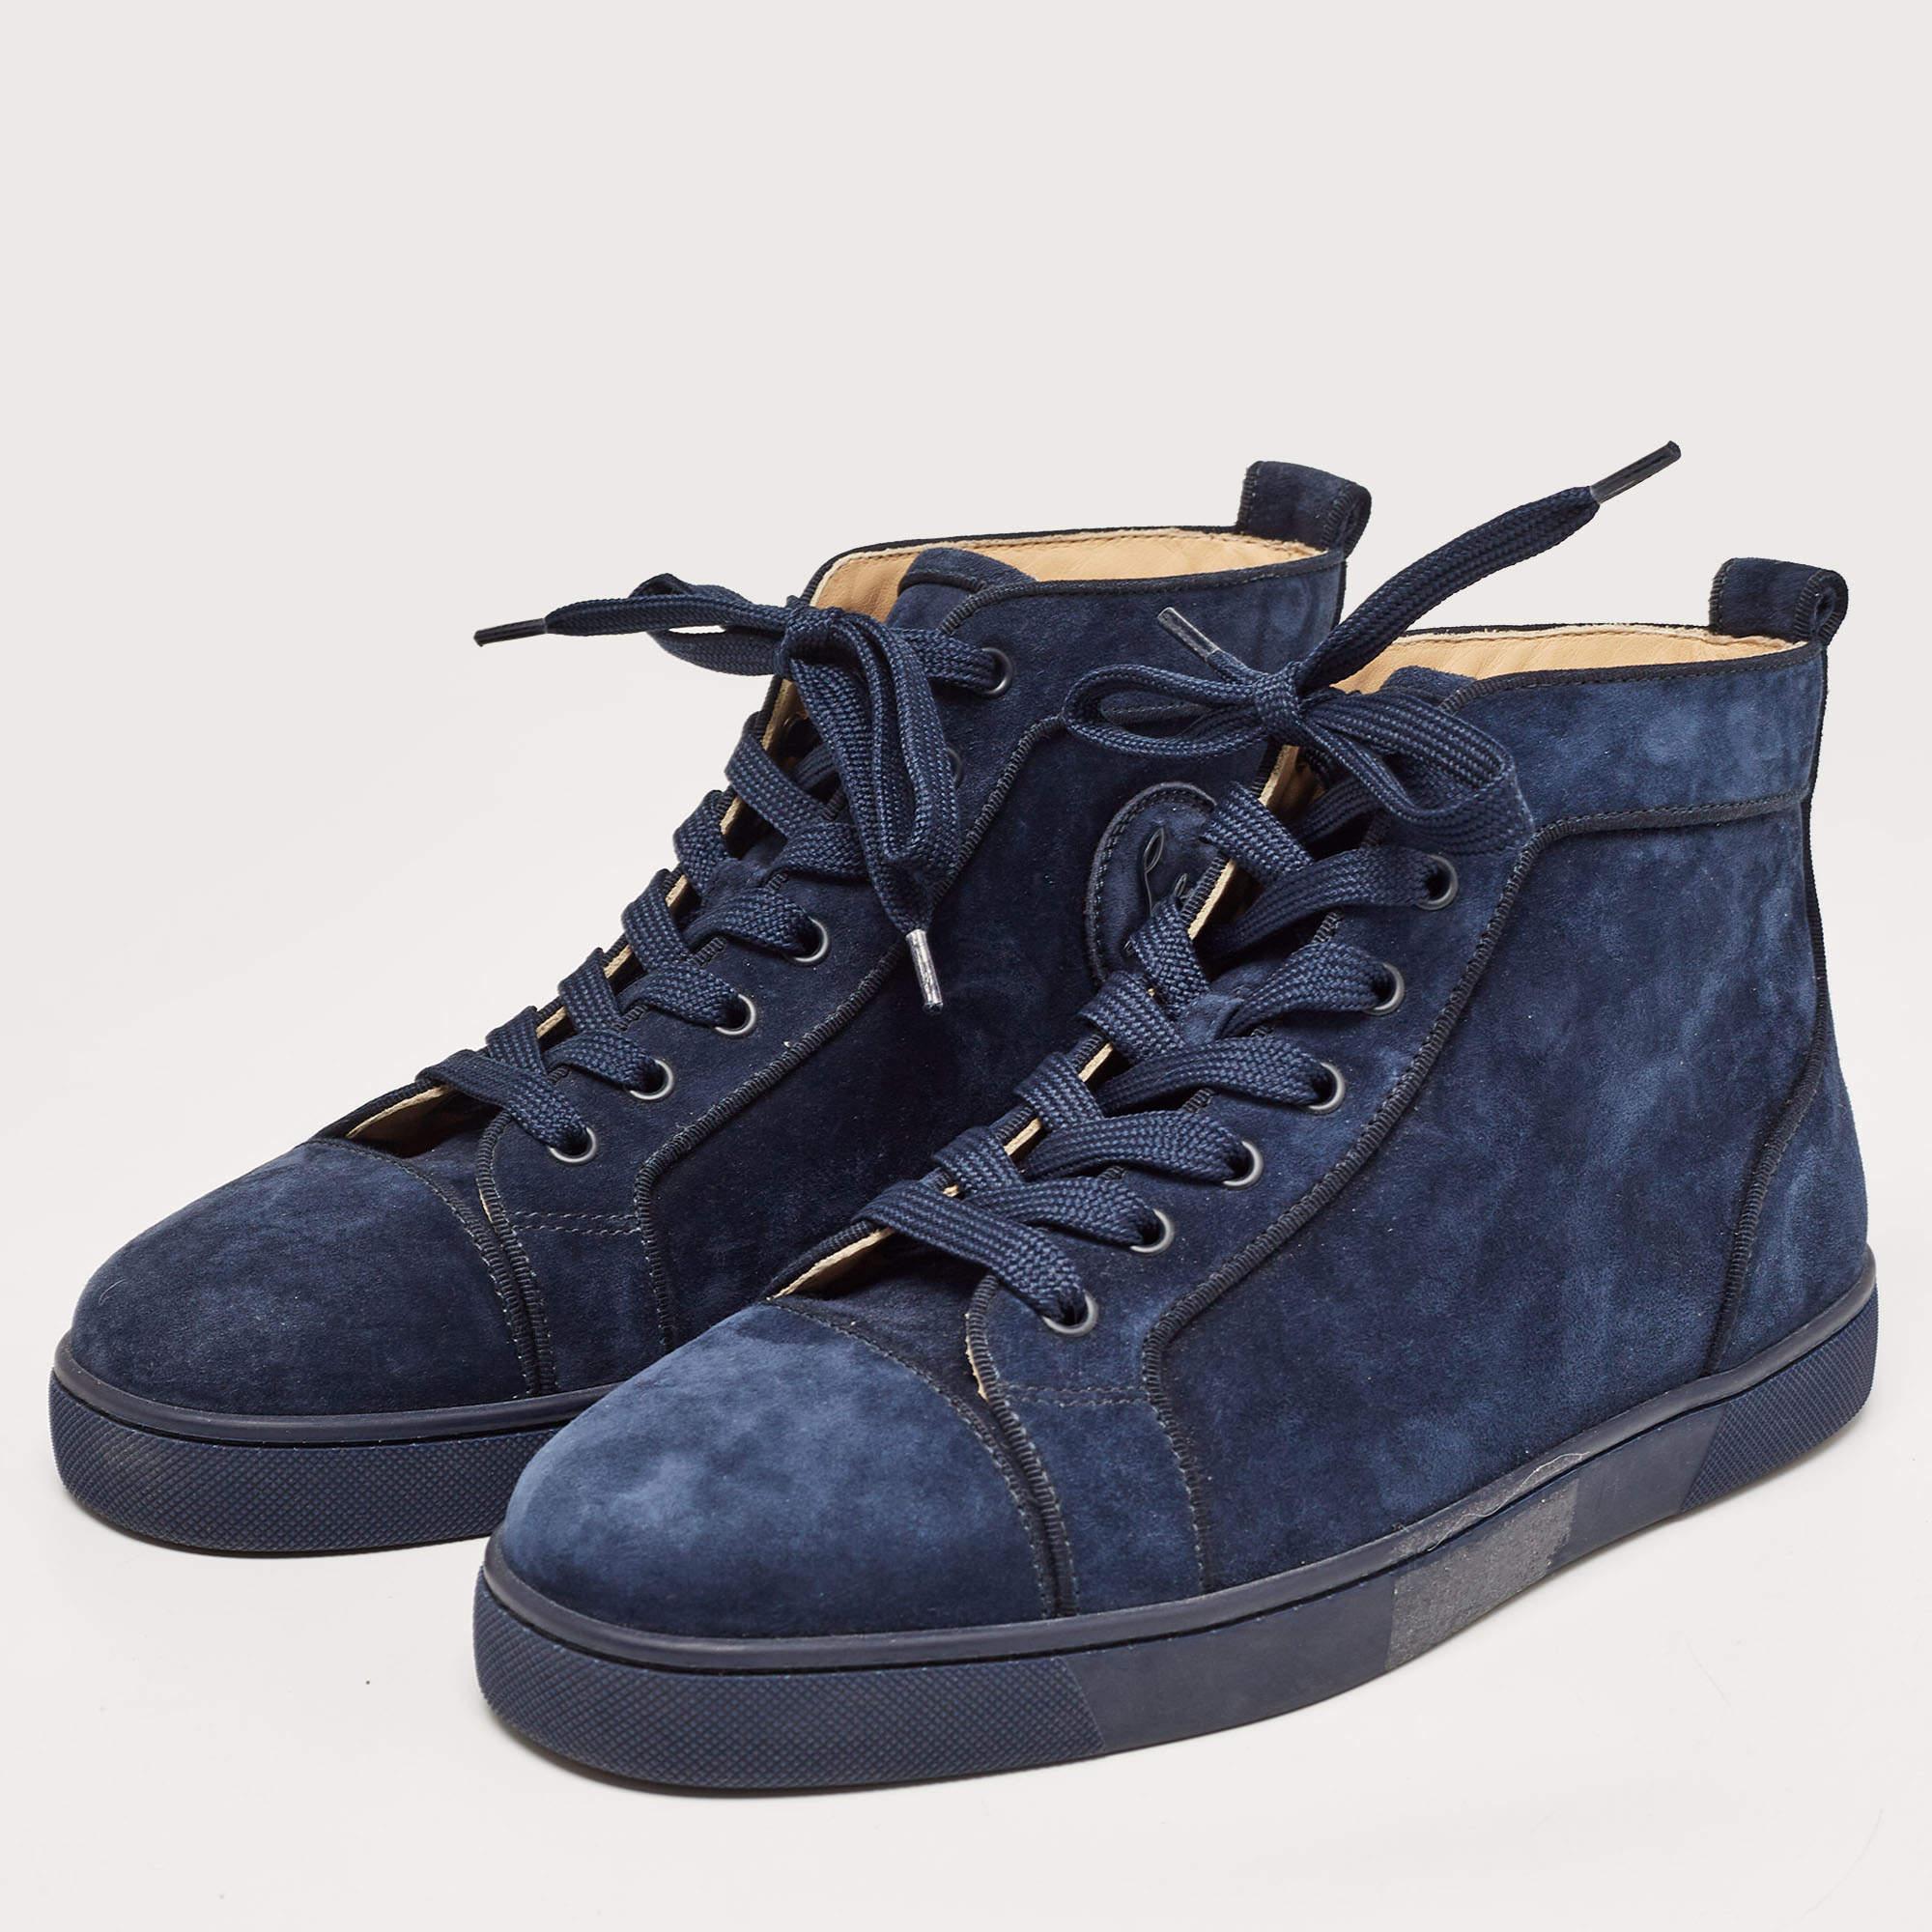 Men's Christian Louboutin Navy Blue Suede High Top Sneakers Size 41 For Sale